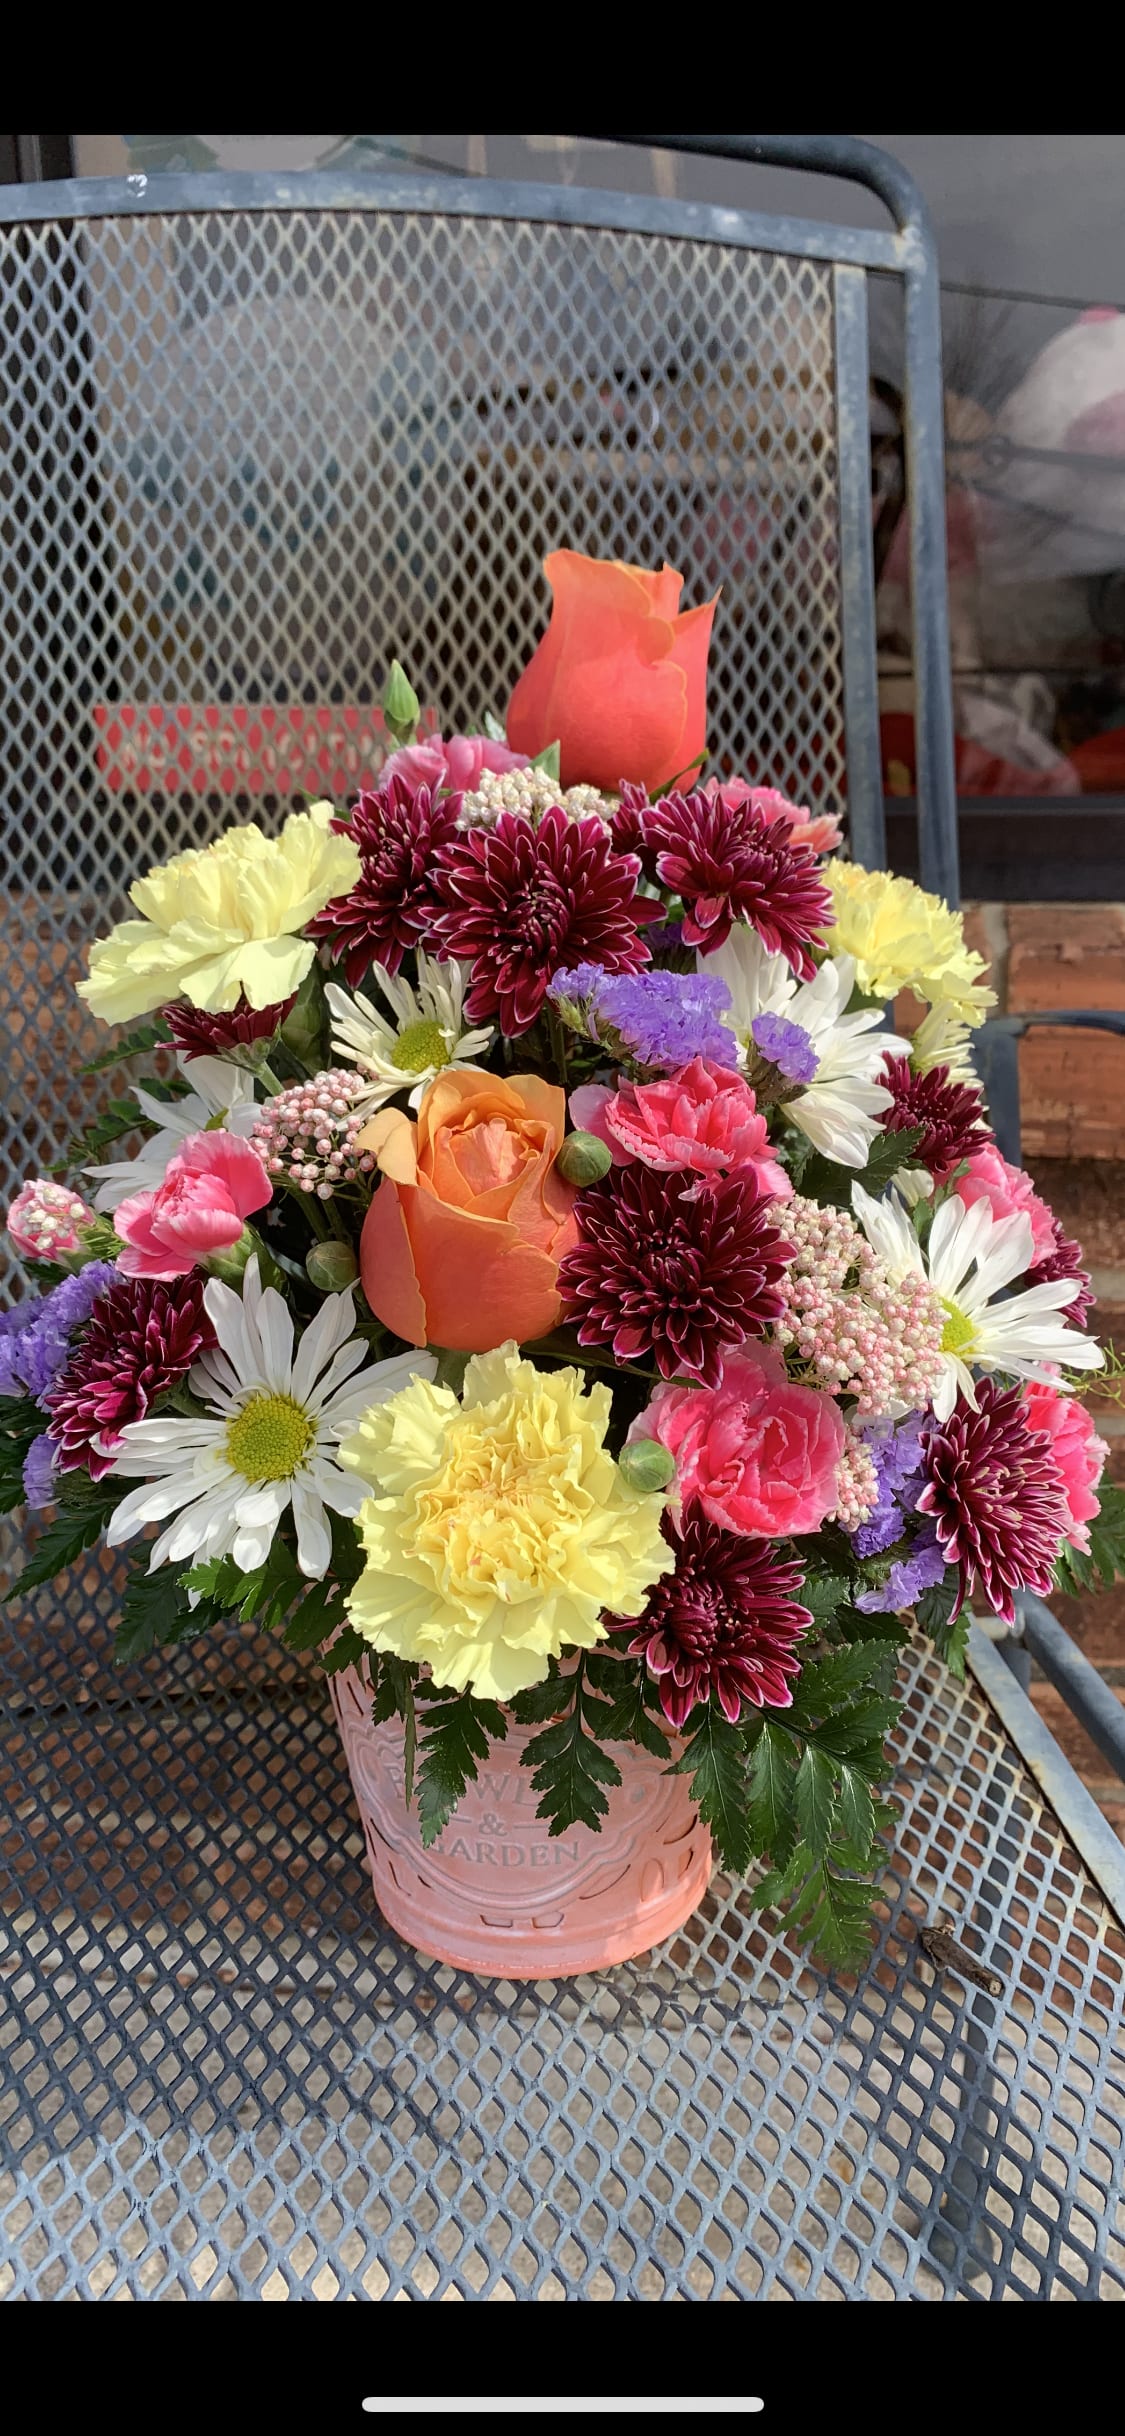 Down The Garden Path - Recipient will surely wear a smile when they receive a bright colorful arrangement in one of our many containers - (container and flowers may vary but will have the same look feel and value as shown)